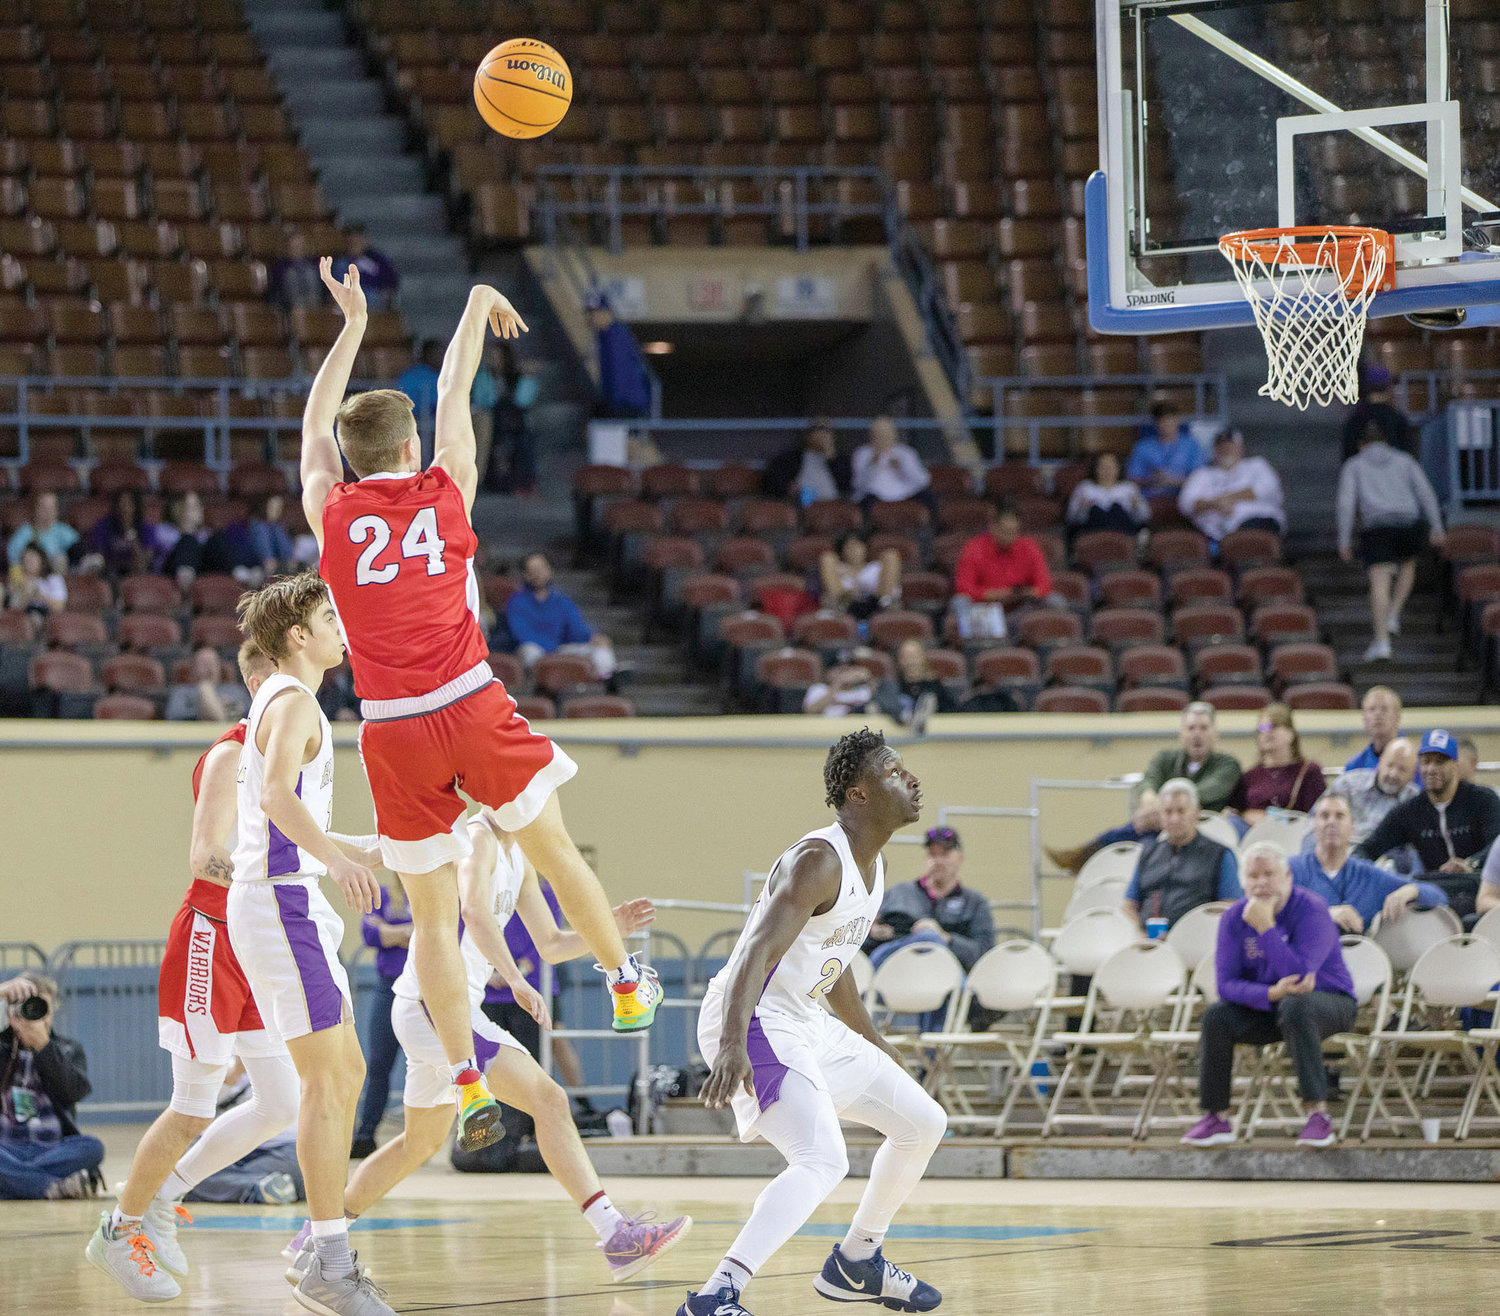 Washington junior Hayden Hicks puts up a jump shot against CCS in the State tournament at State Fair Arena. The Warriors fell 53-49. Hicks scored a team-high 14 points.